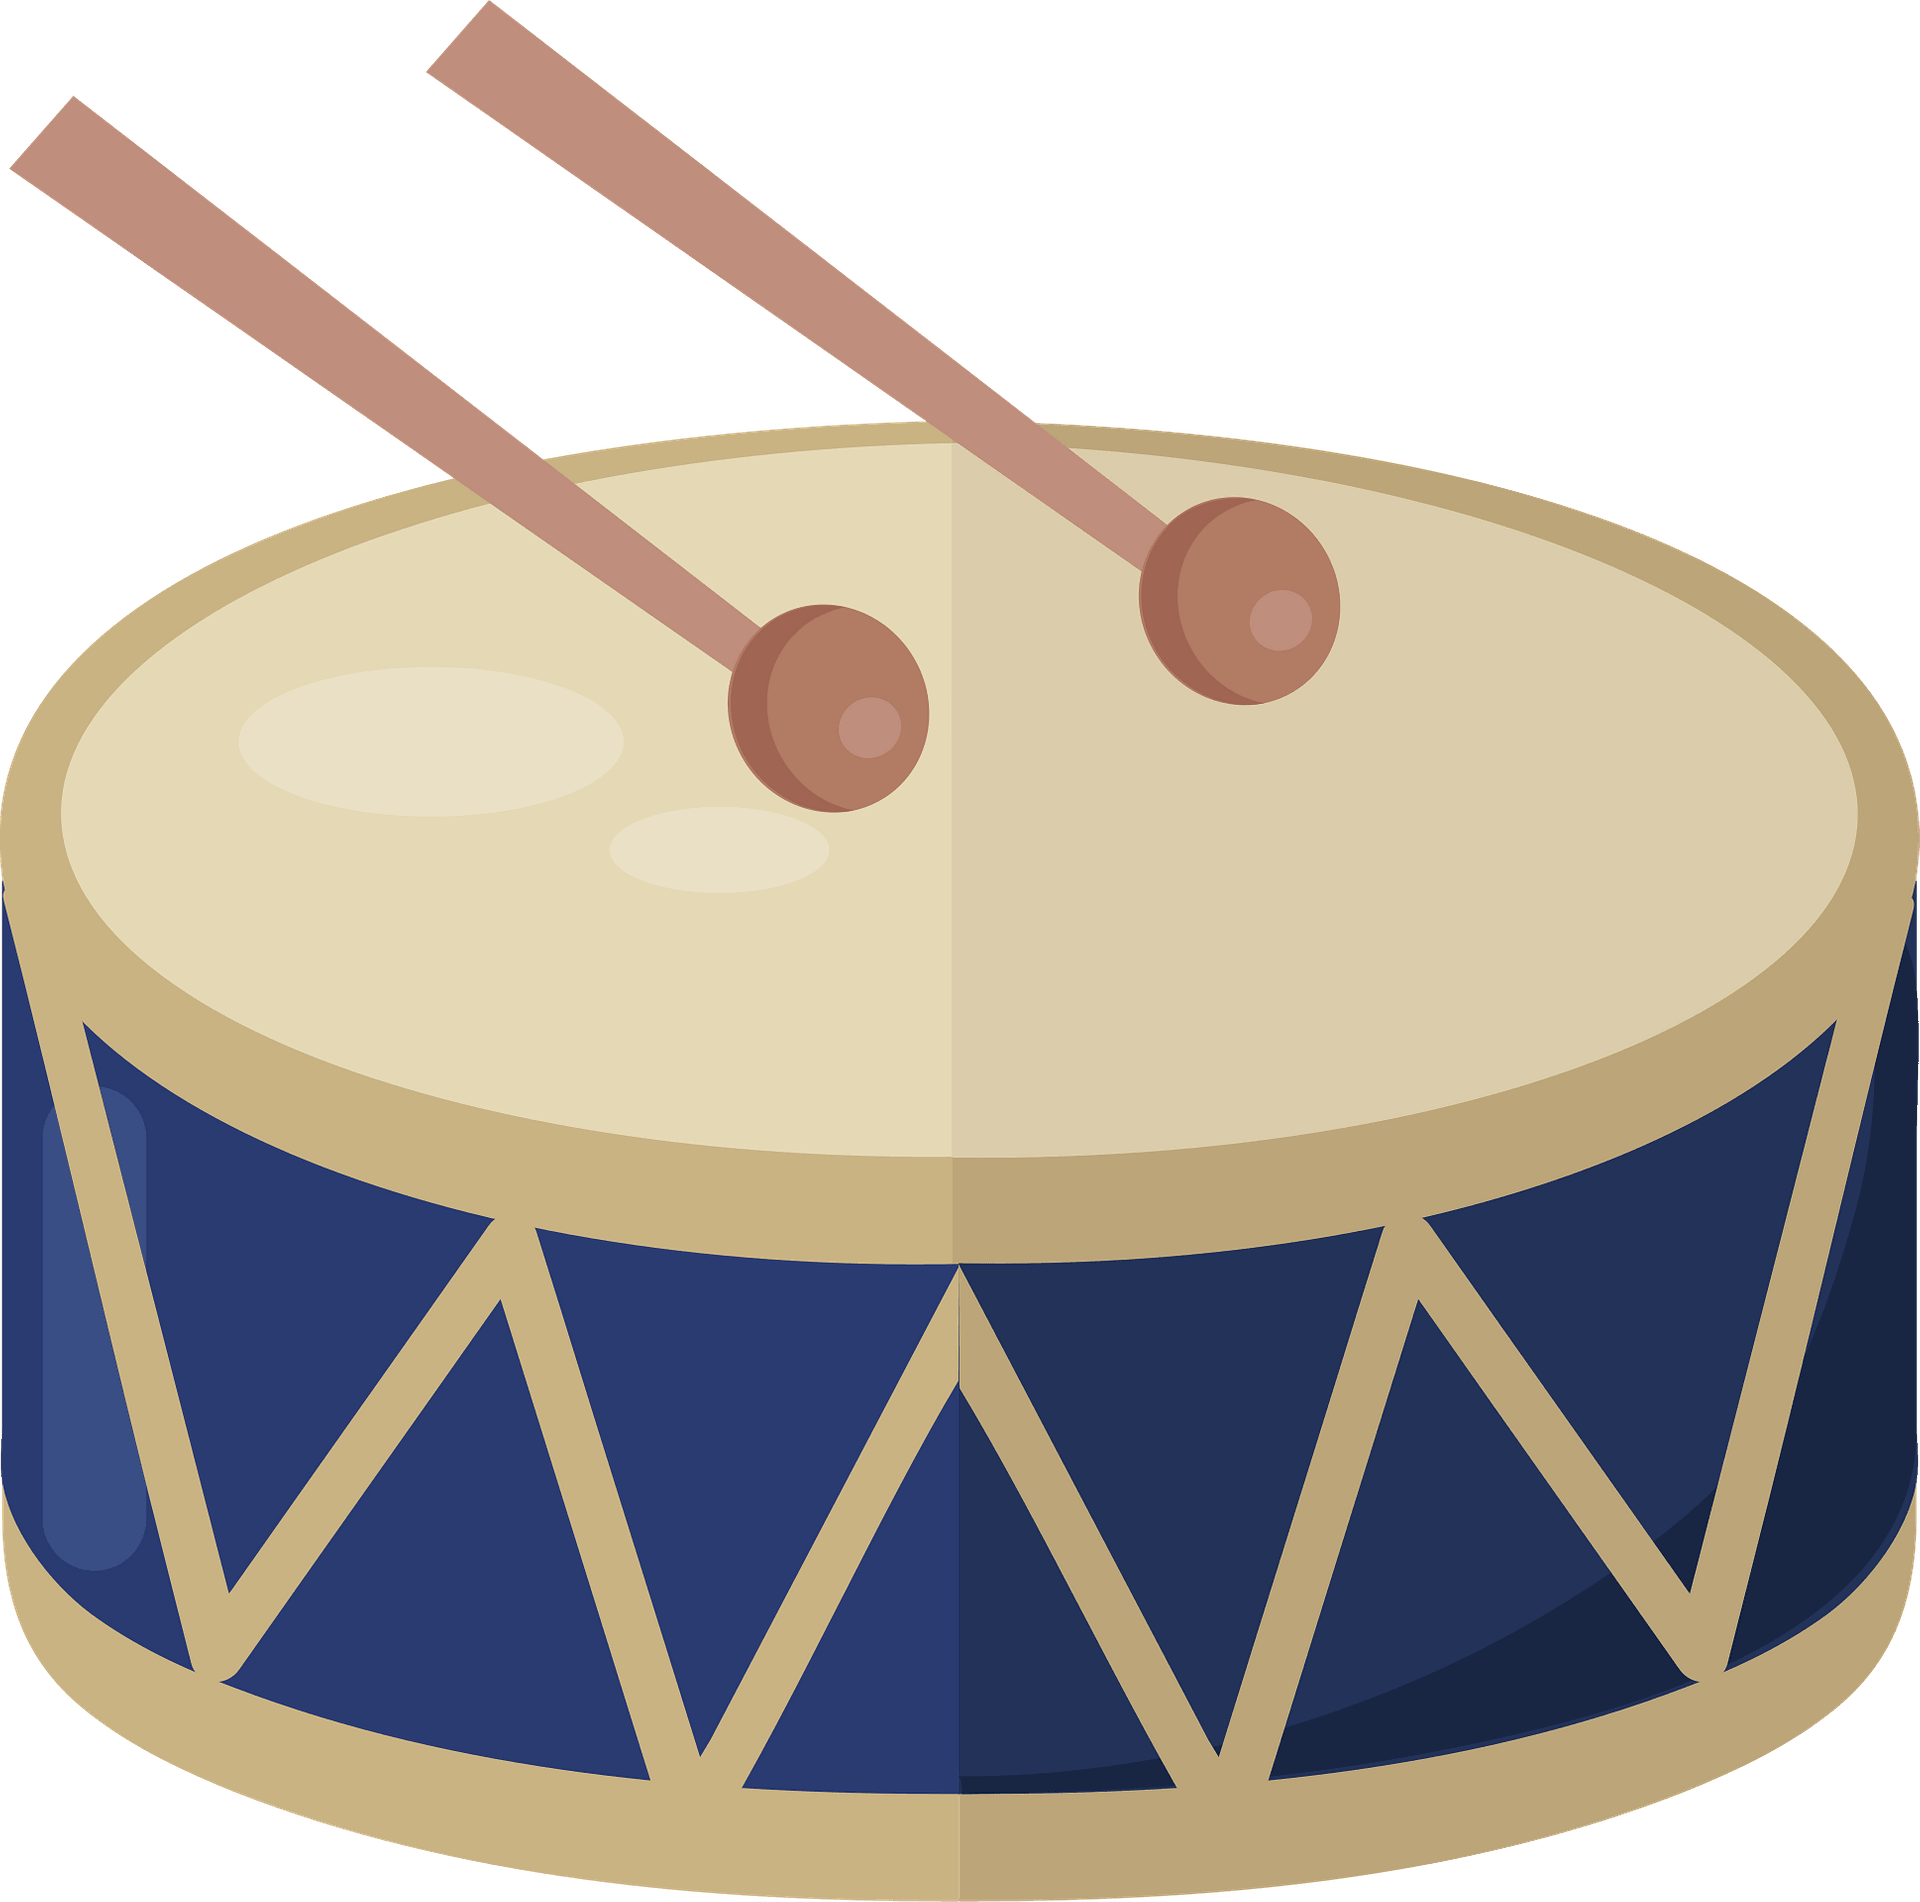 Snare Drum Marching Percussion Drum Stick Clip Art, PNG - Clip Art Library